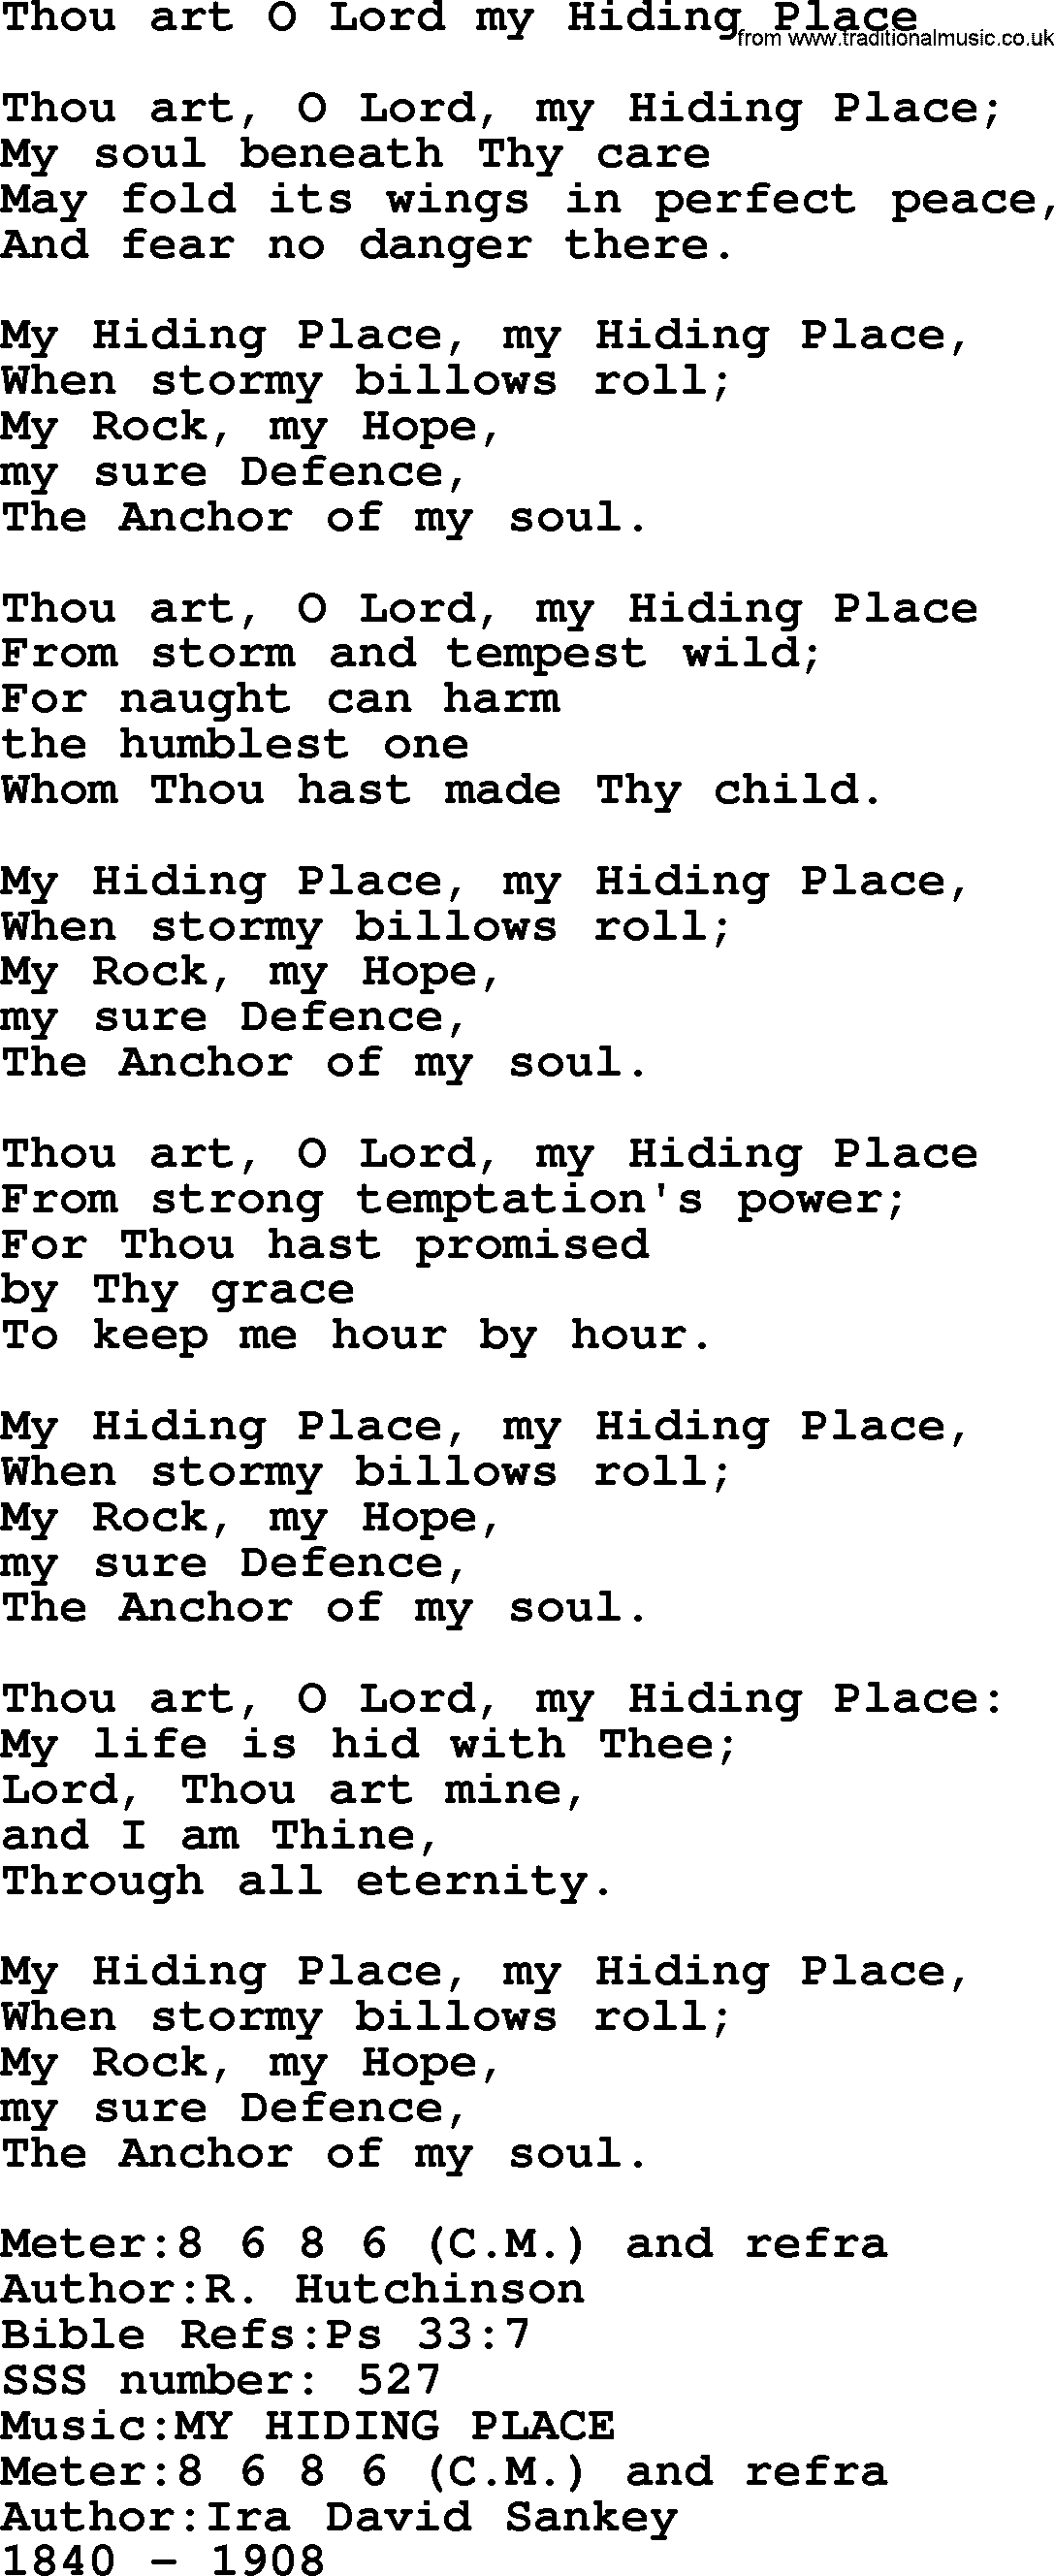 https://www.traditionalmusic.co.uk/sacred-songs/png/thou-art-o-lord-my-hiding-place.png